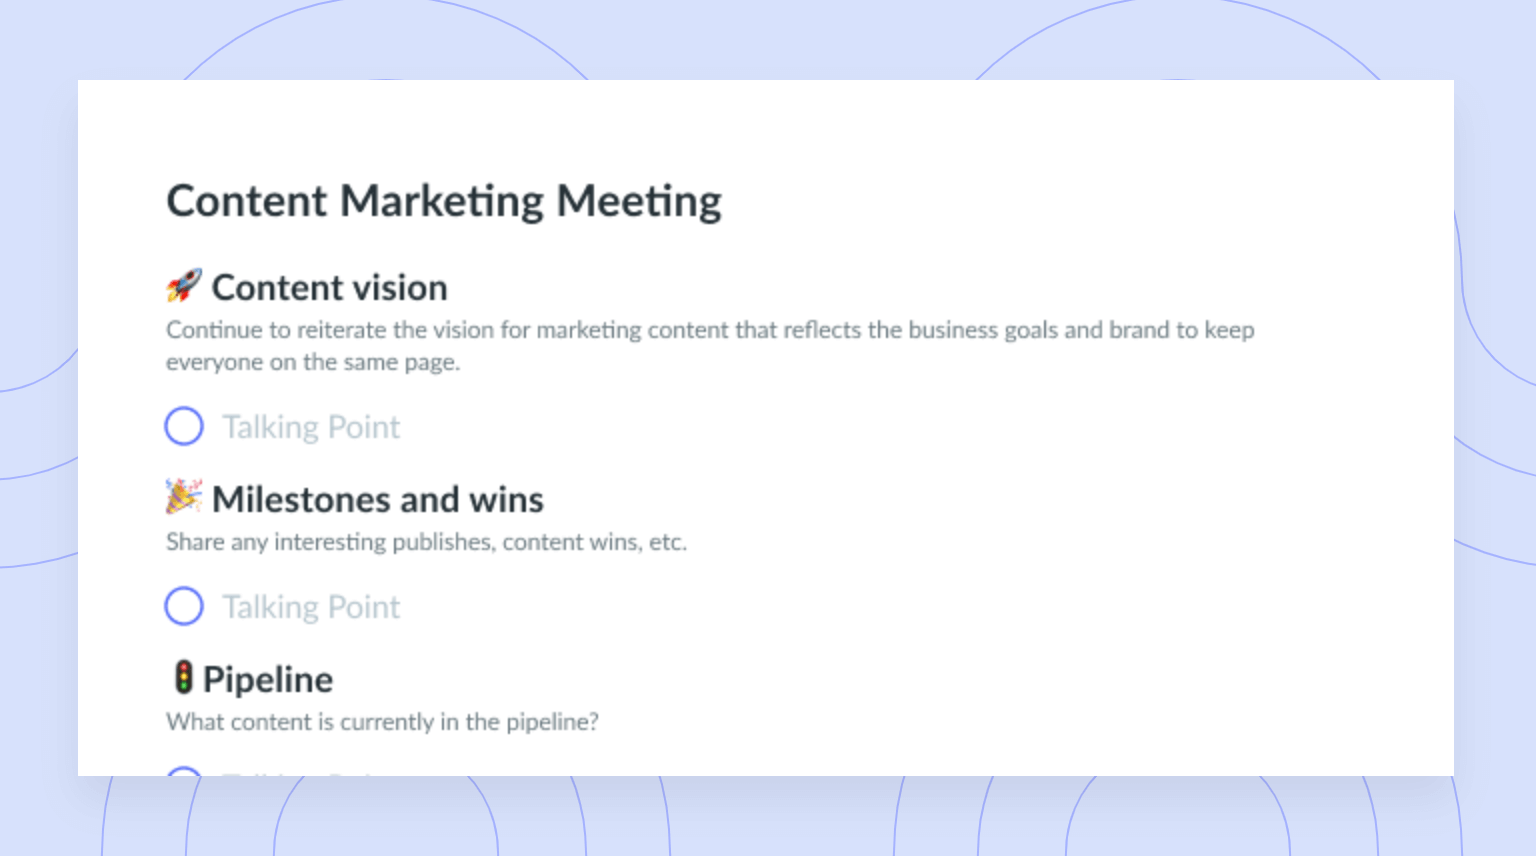 Content Marketing Meeting Template